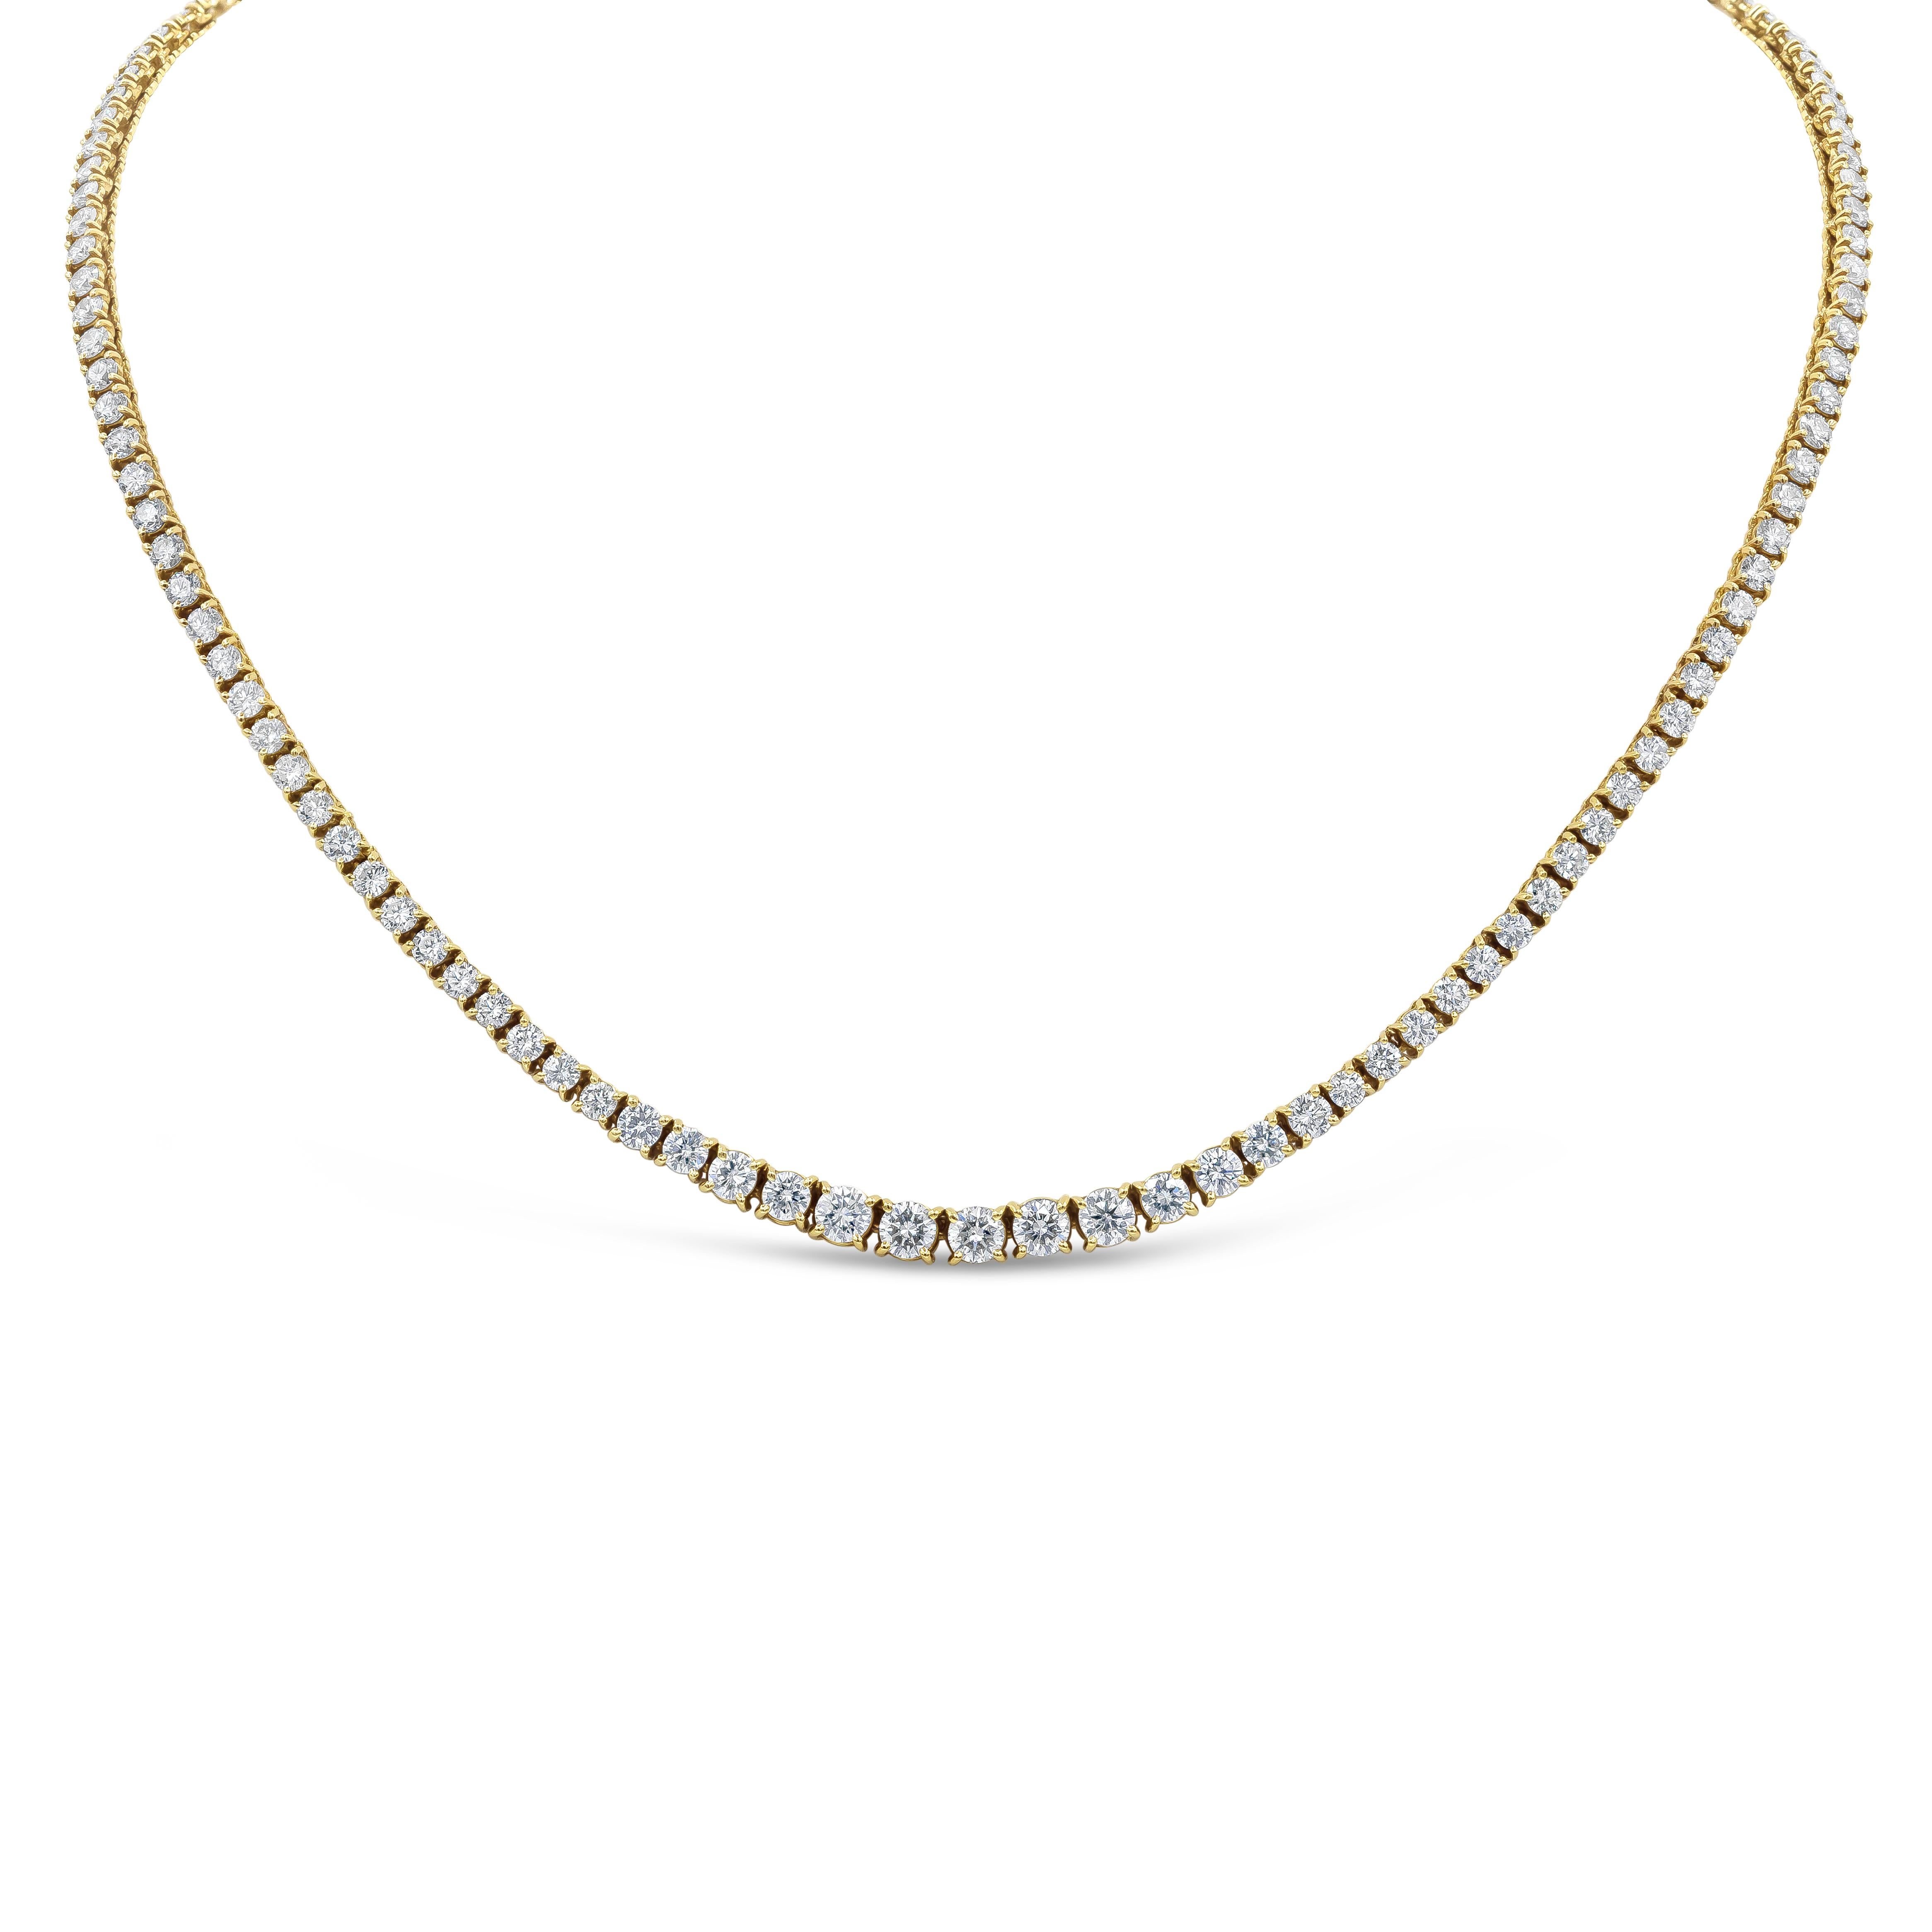 A brilliant and classic piece of jewelry showcasing a line of round brilliant diamonds that elegantly get larger to the center of the necklace. Diamonds weigh 11.58 carats total and is set in 18K yellow gold, 16 inches in length.

Roman Malakov is a